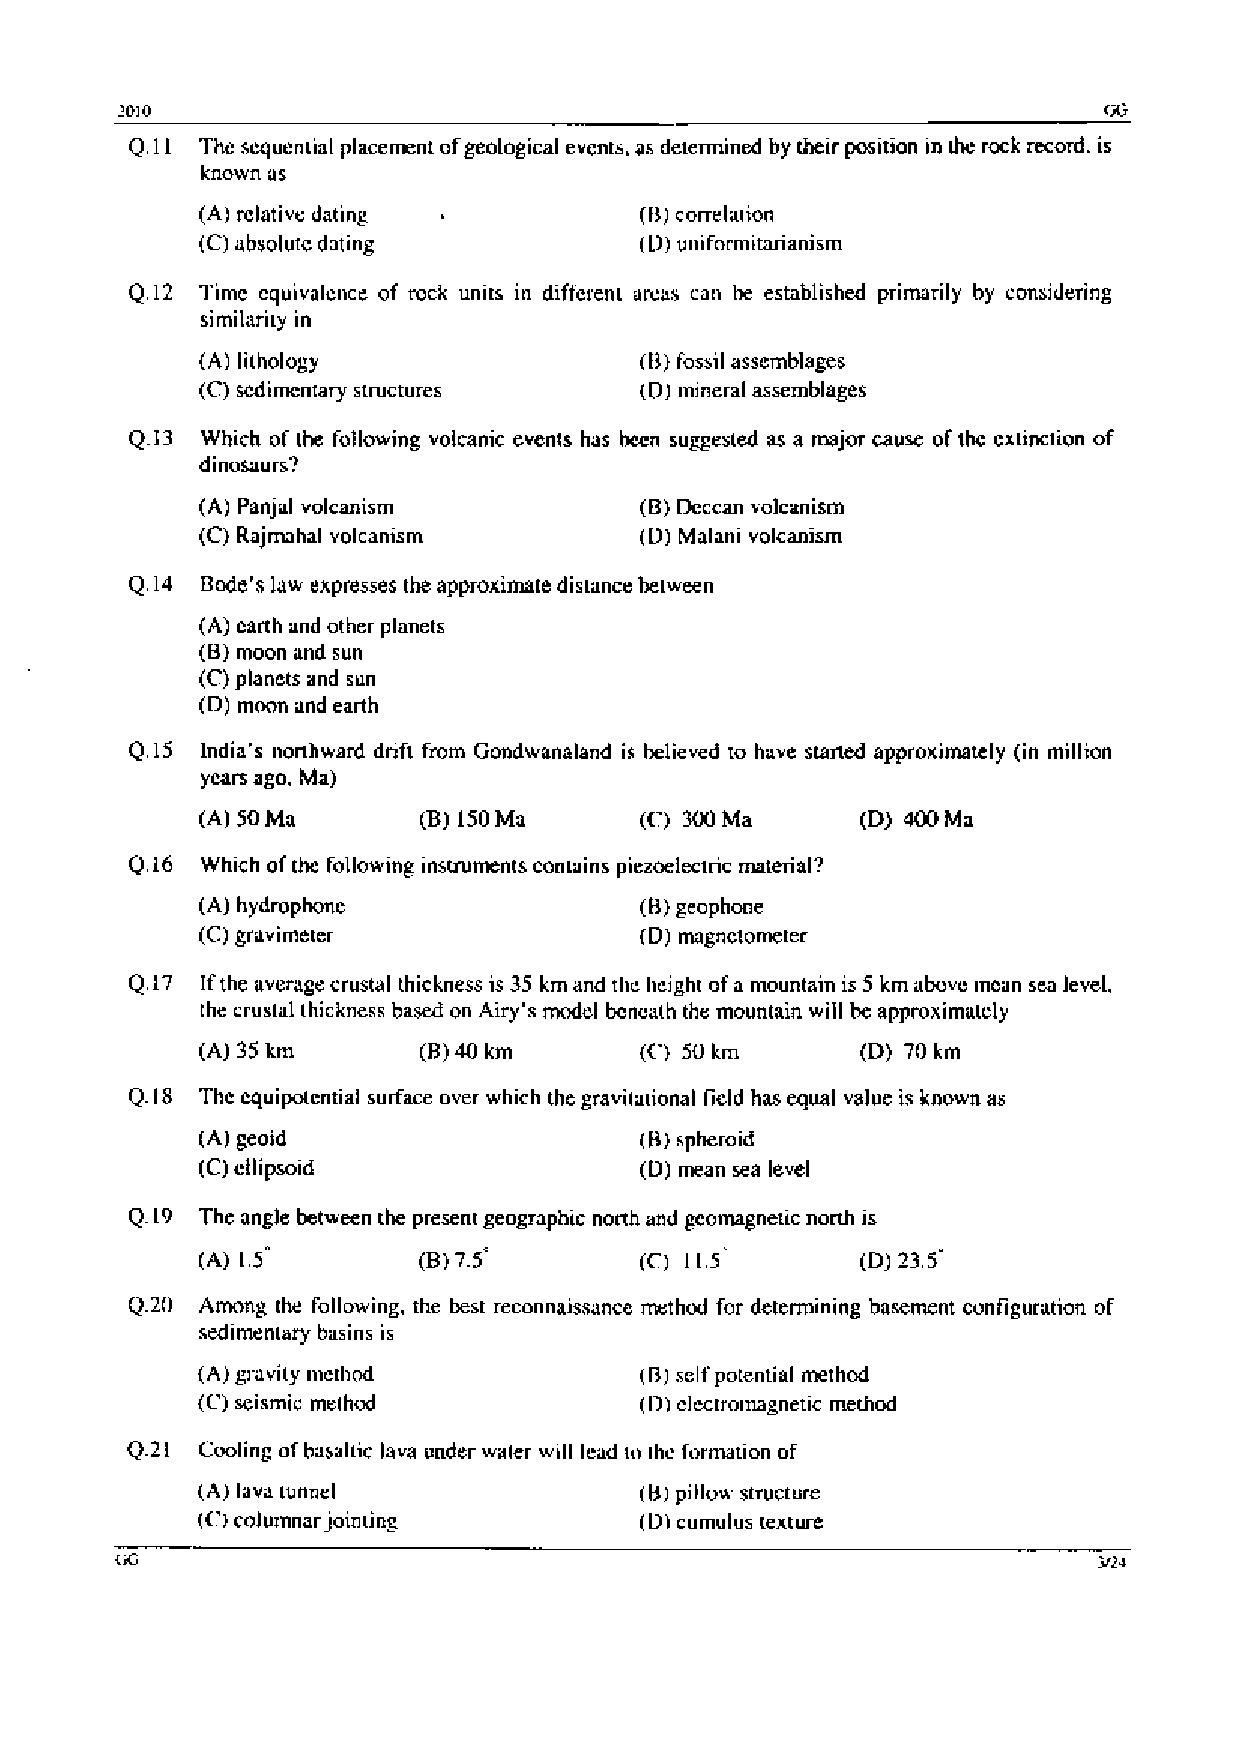 GATE Exam Question Paper 2010 Geology and Geophysics 3